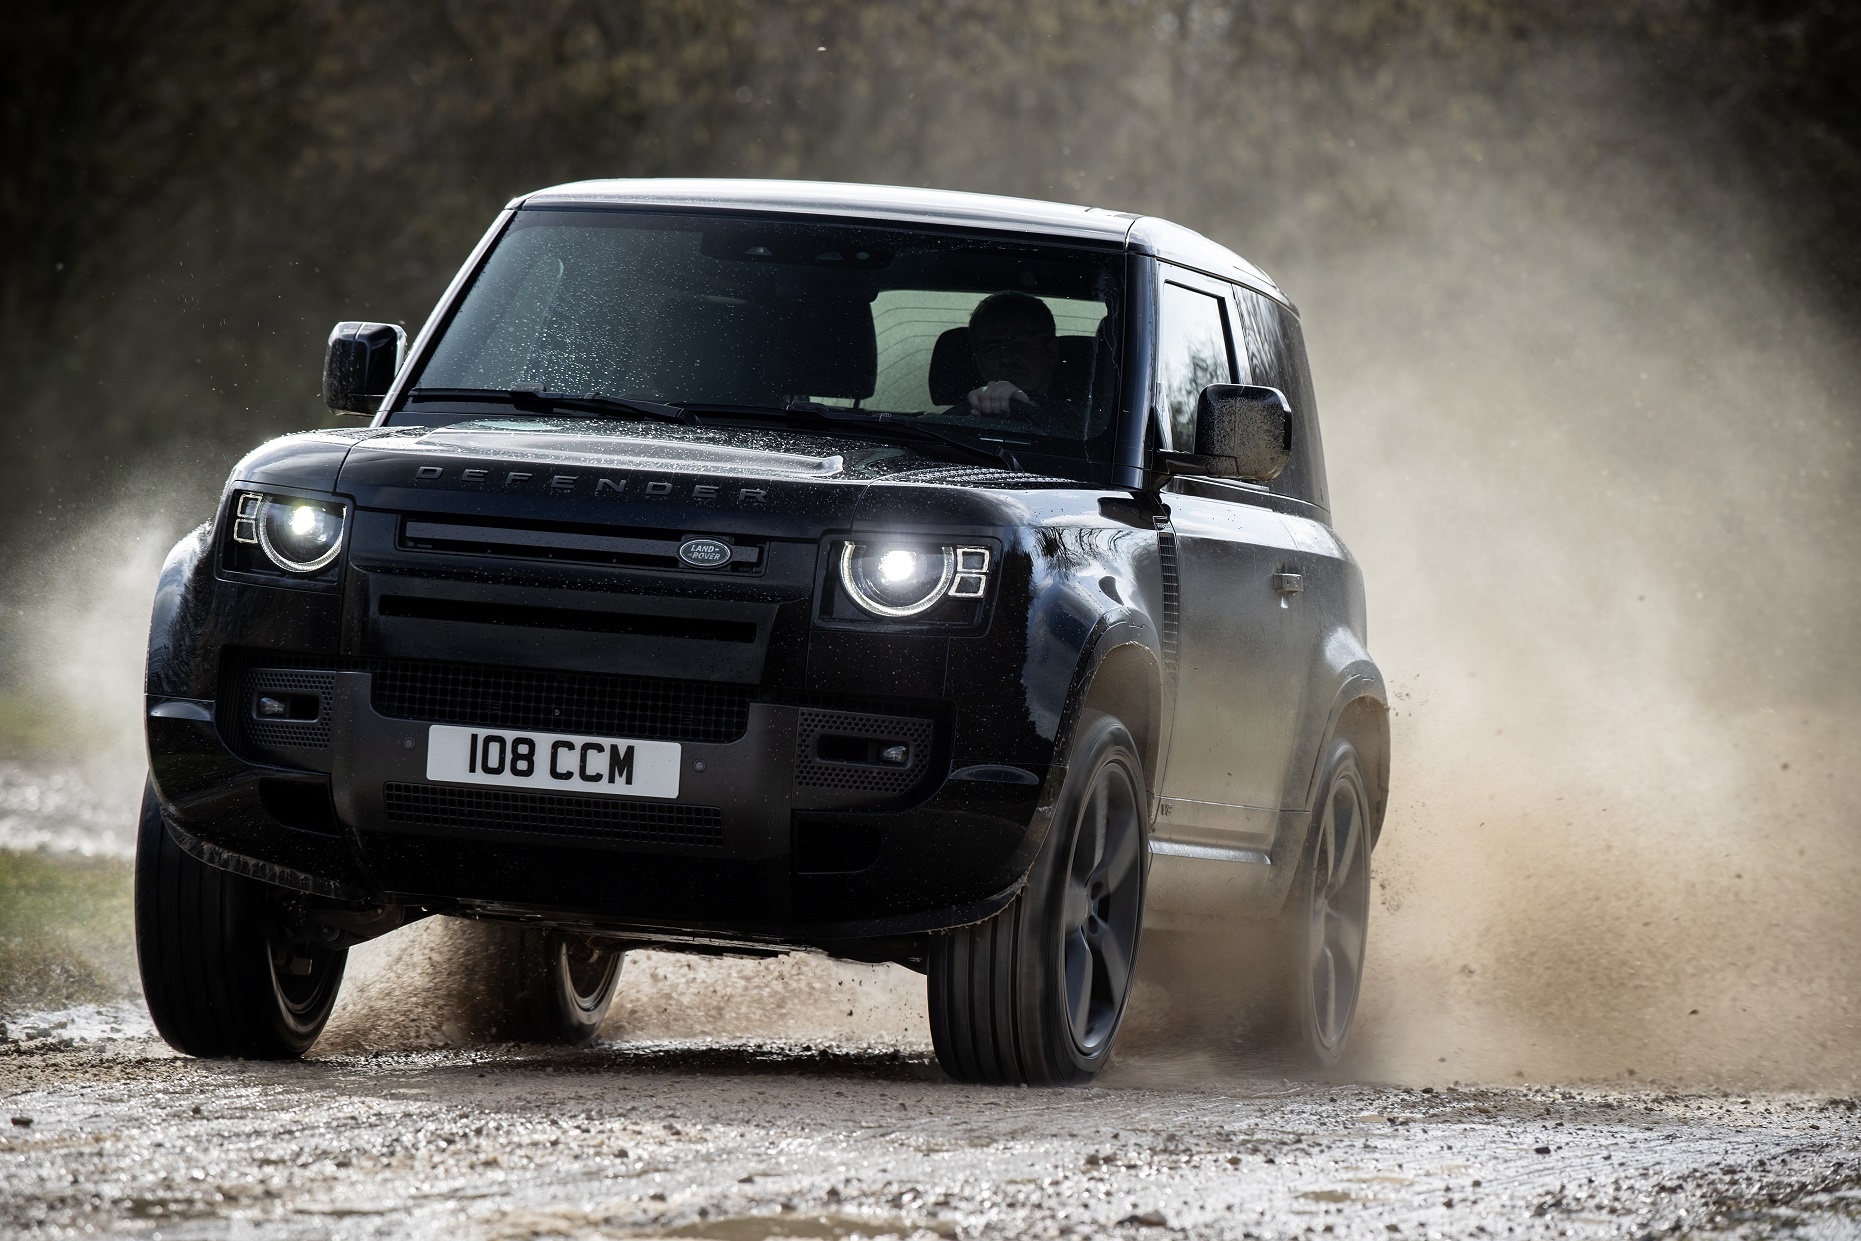 POTENT NEW DEFENDER V8 AND EXCLUSIVE SPECIAL EDITIONS JOIN THE RANGE